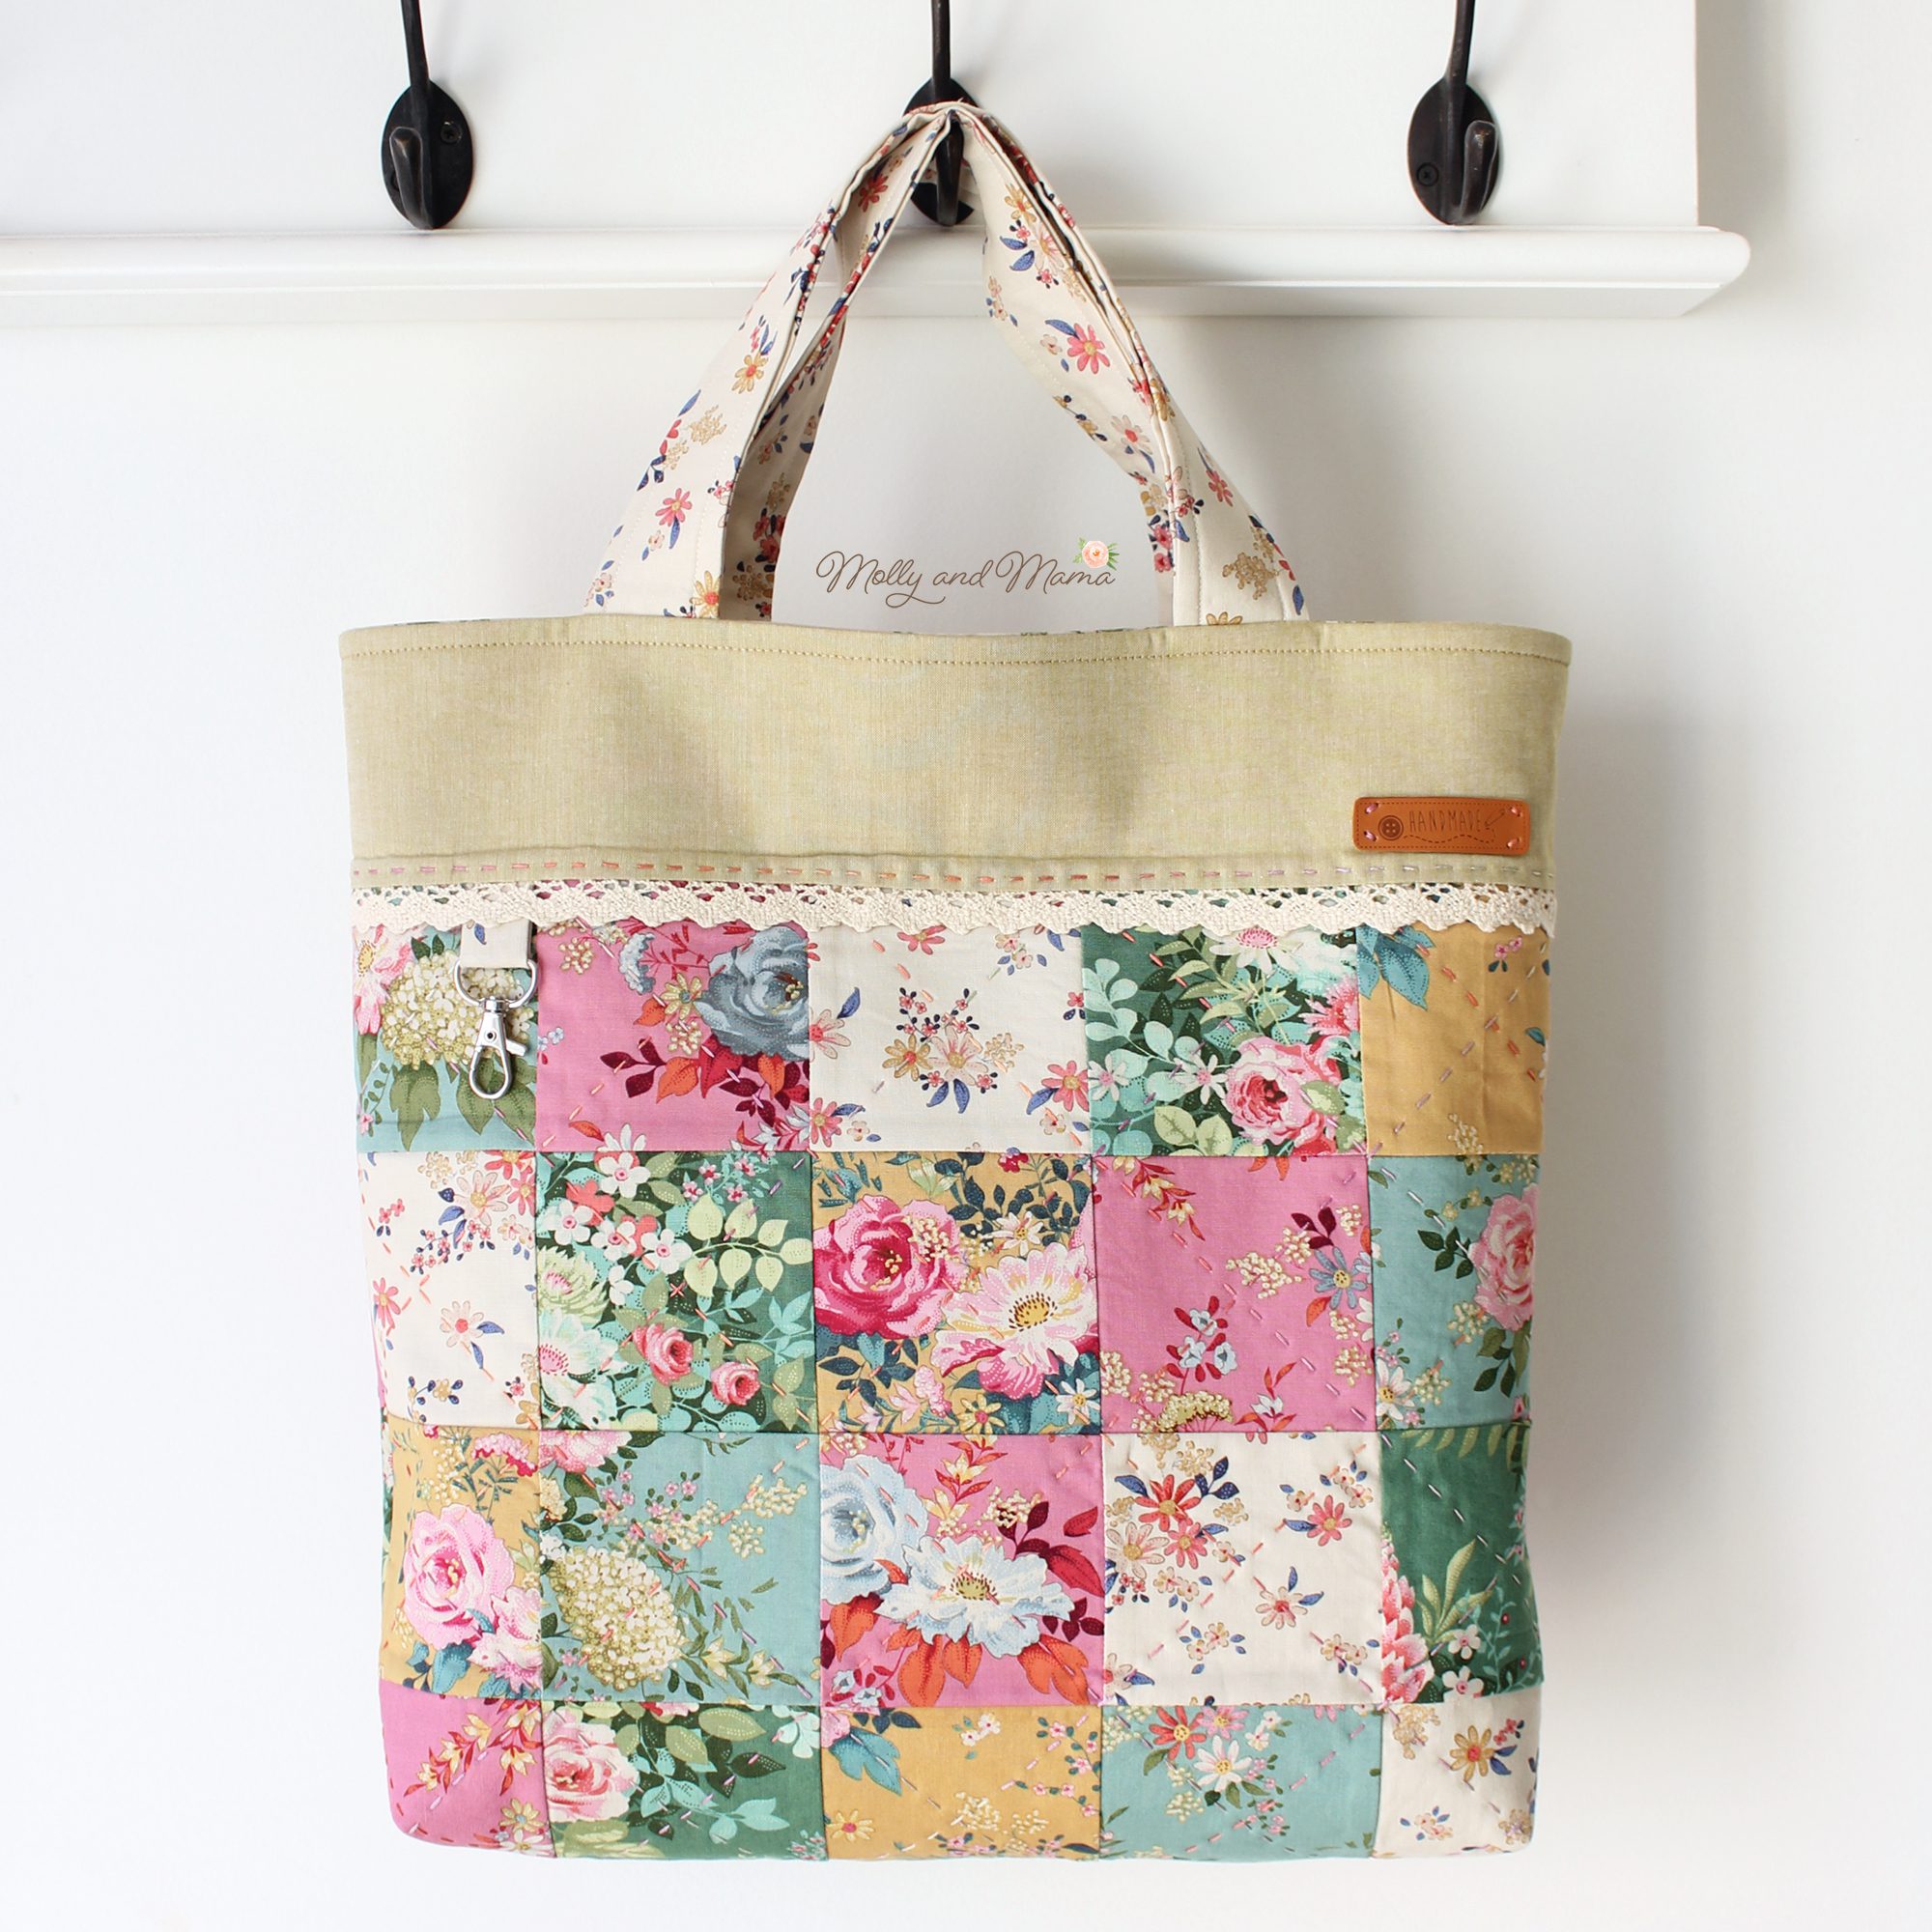 How to Make a Quilted Weekend Tote Bag / Sewing Tutorial